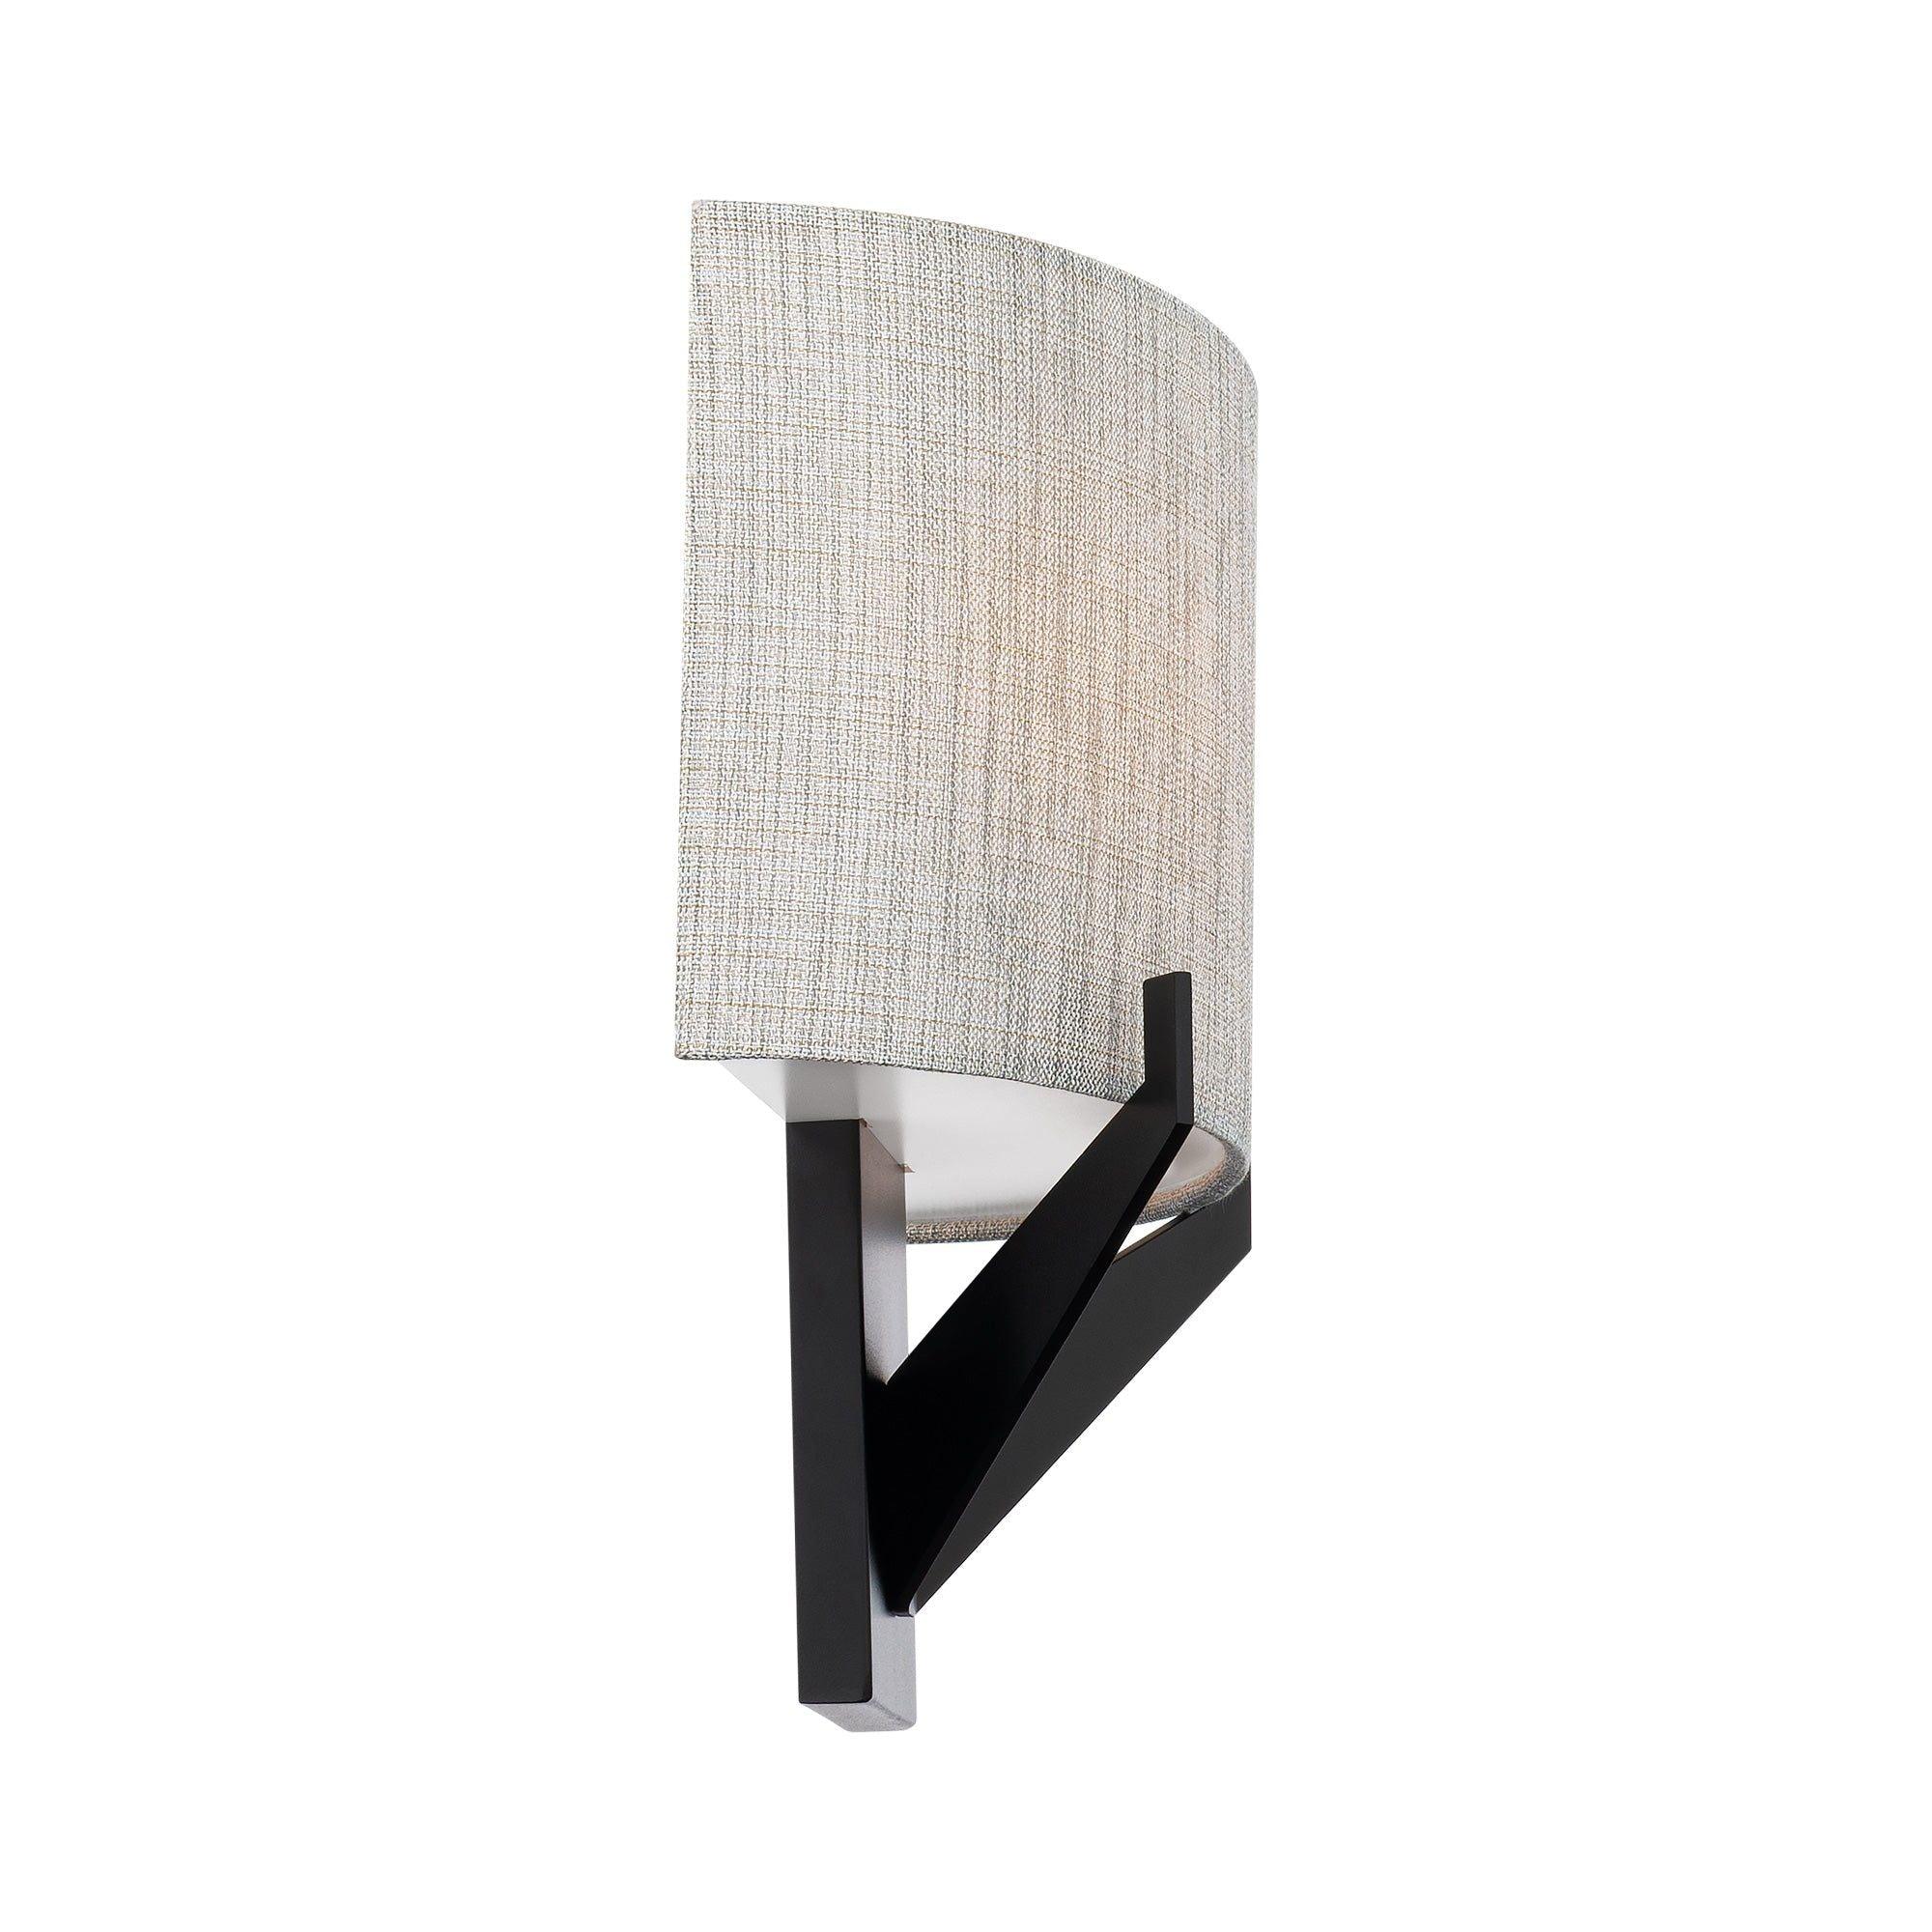 dweLED - Fitzgerald 12" LED Wall Sconce - Lights Canada